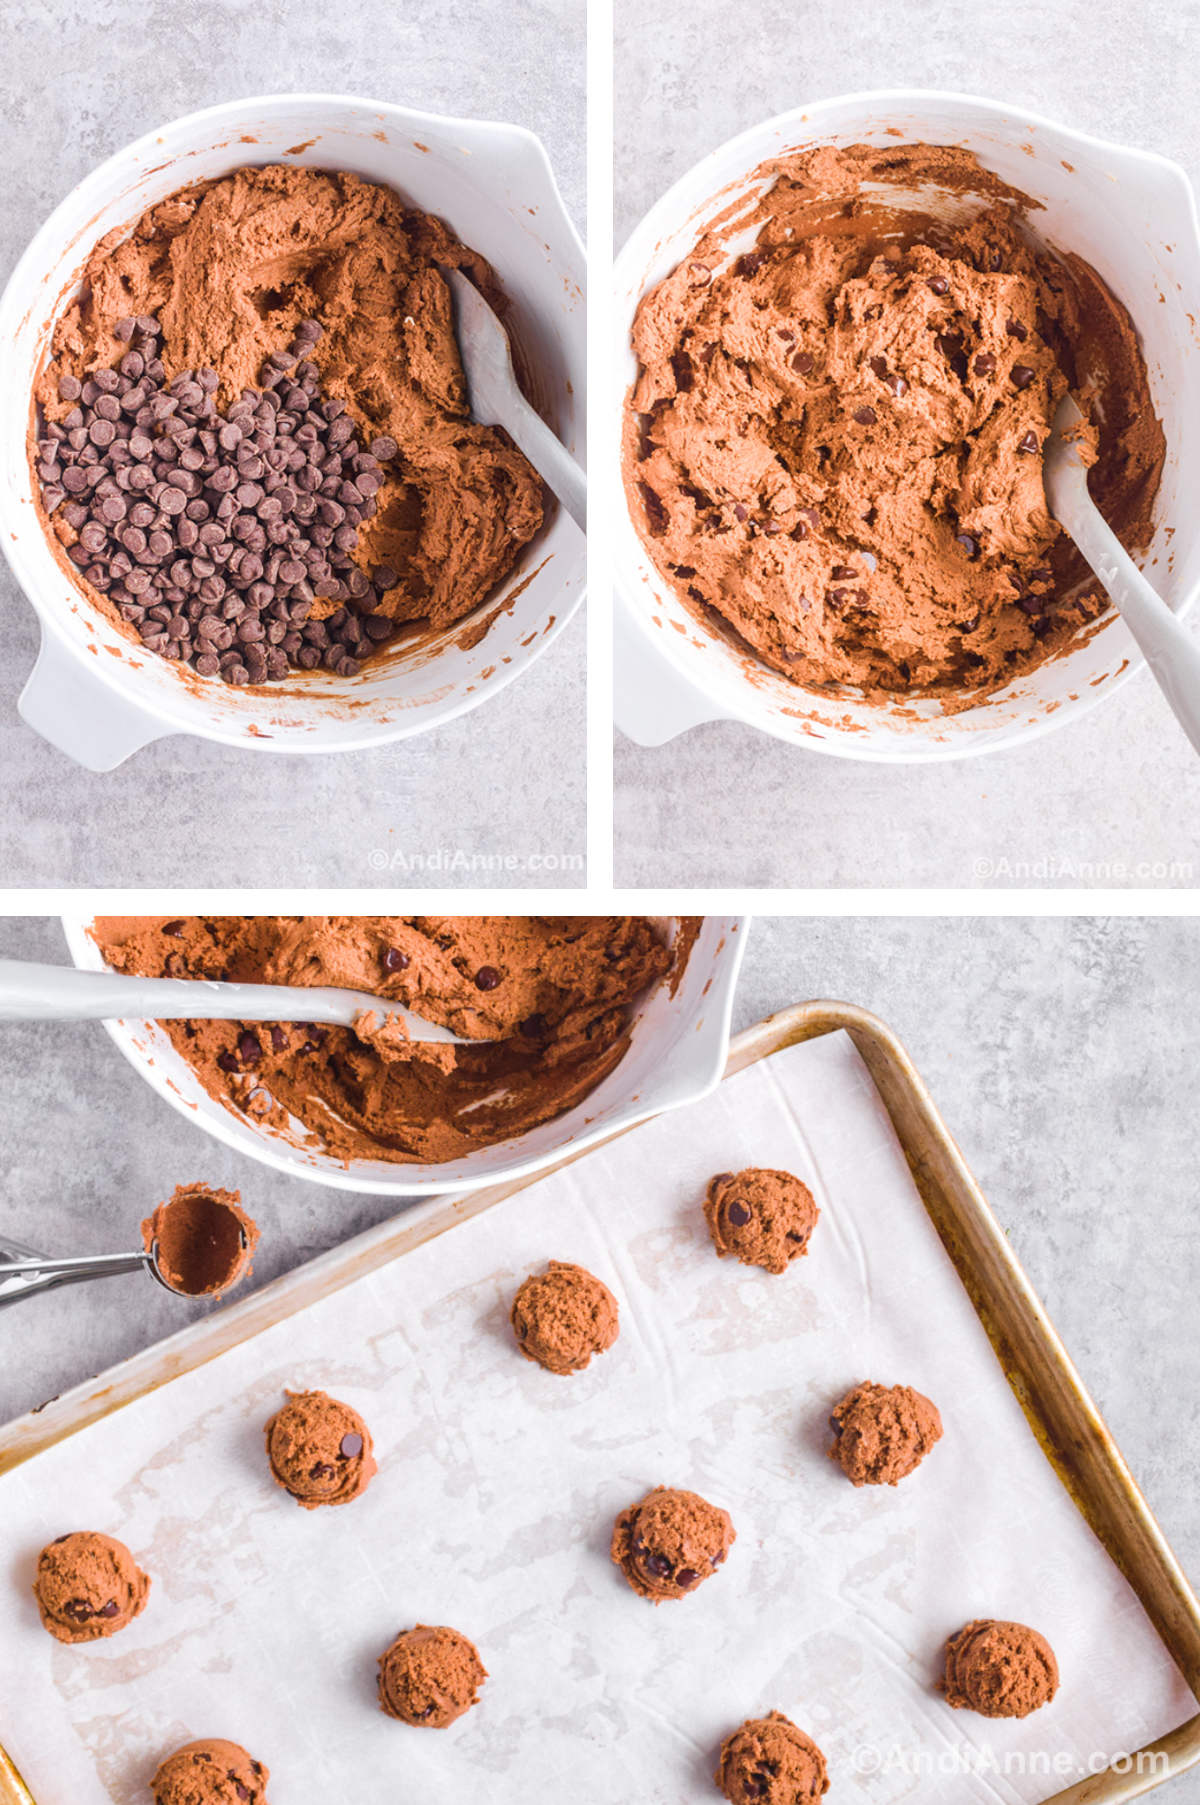 Three overhead images in one: 1. Chocolate chips are added. 2. Chocolate chips are folded in. 3. 1 Tbsp sized dough balls are placed on baking sheet 2 inches apart.